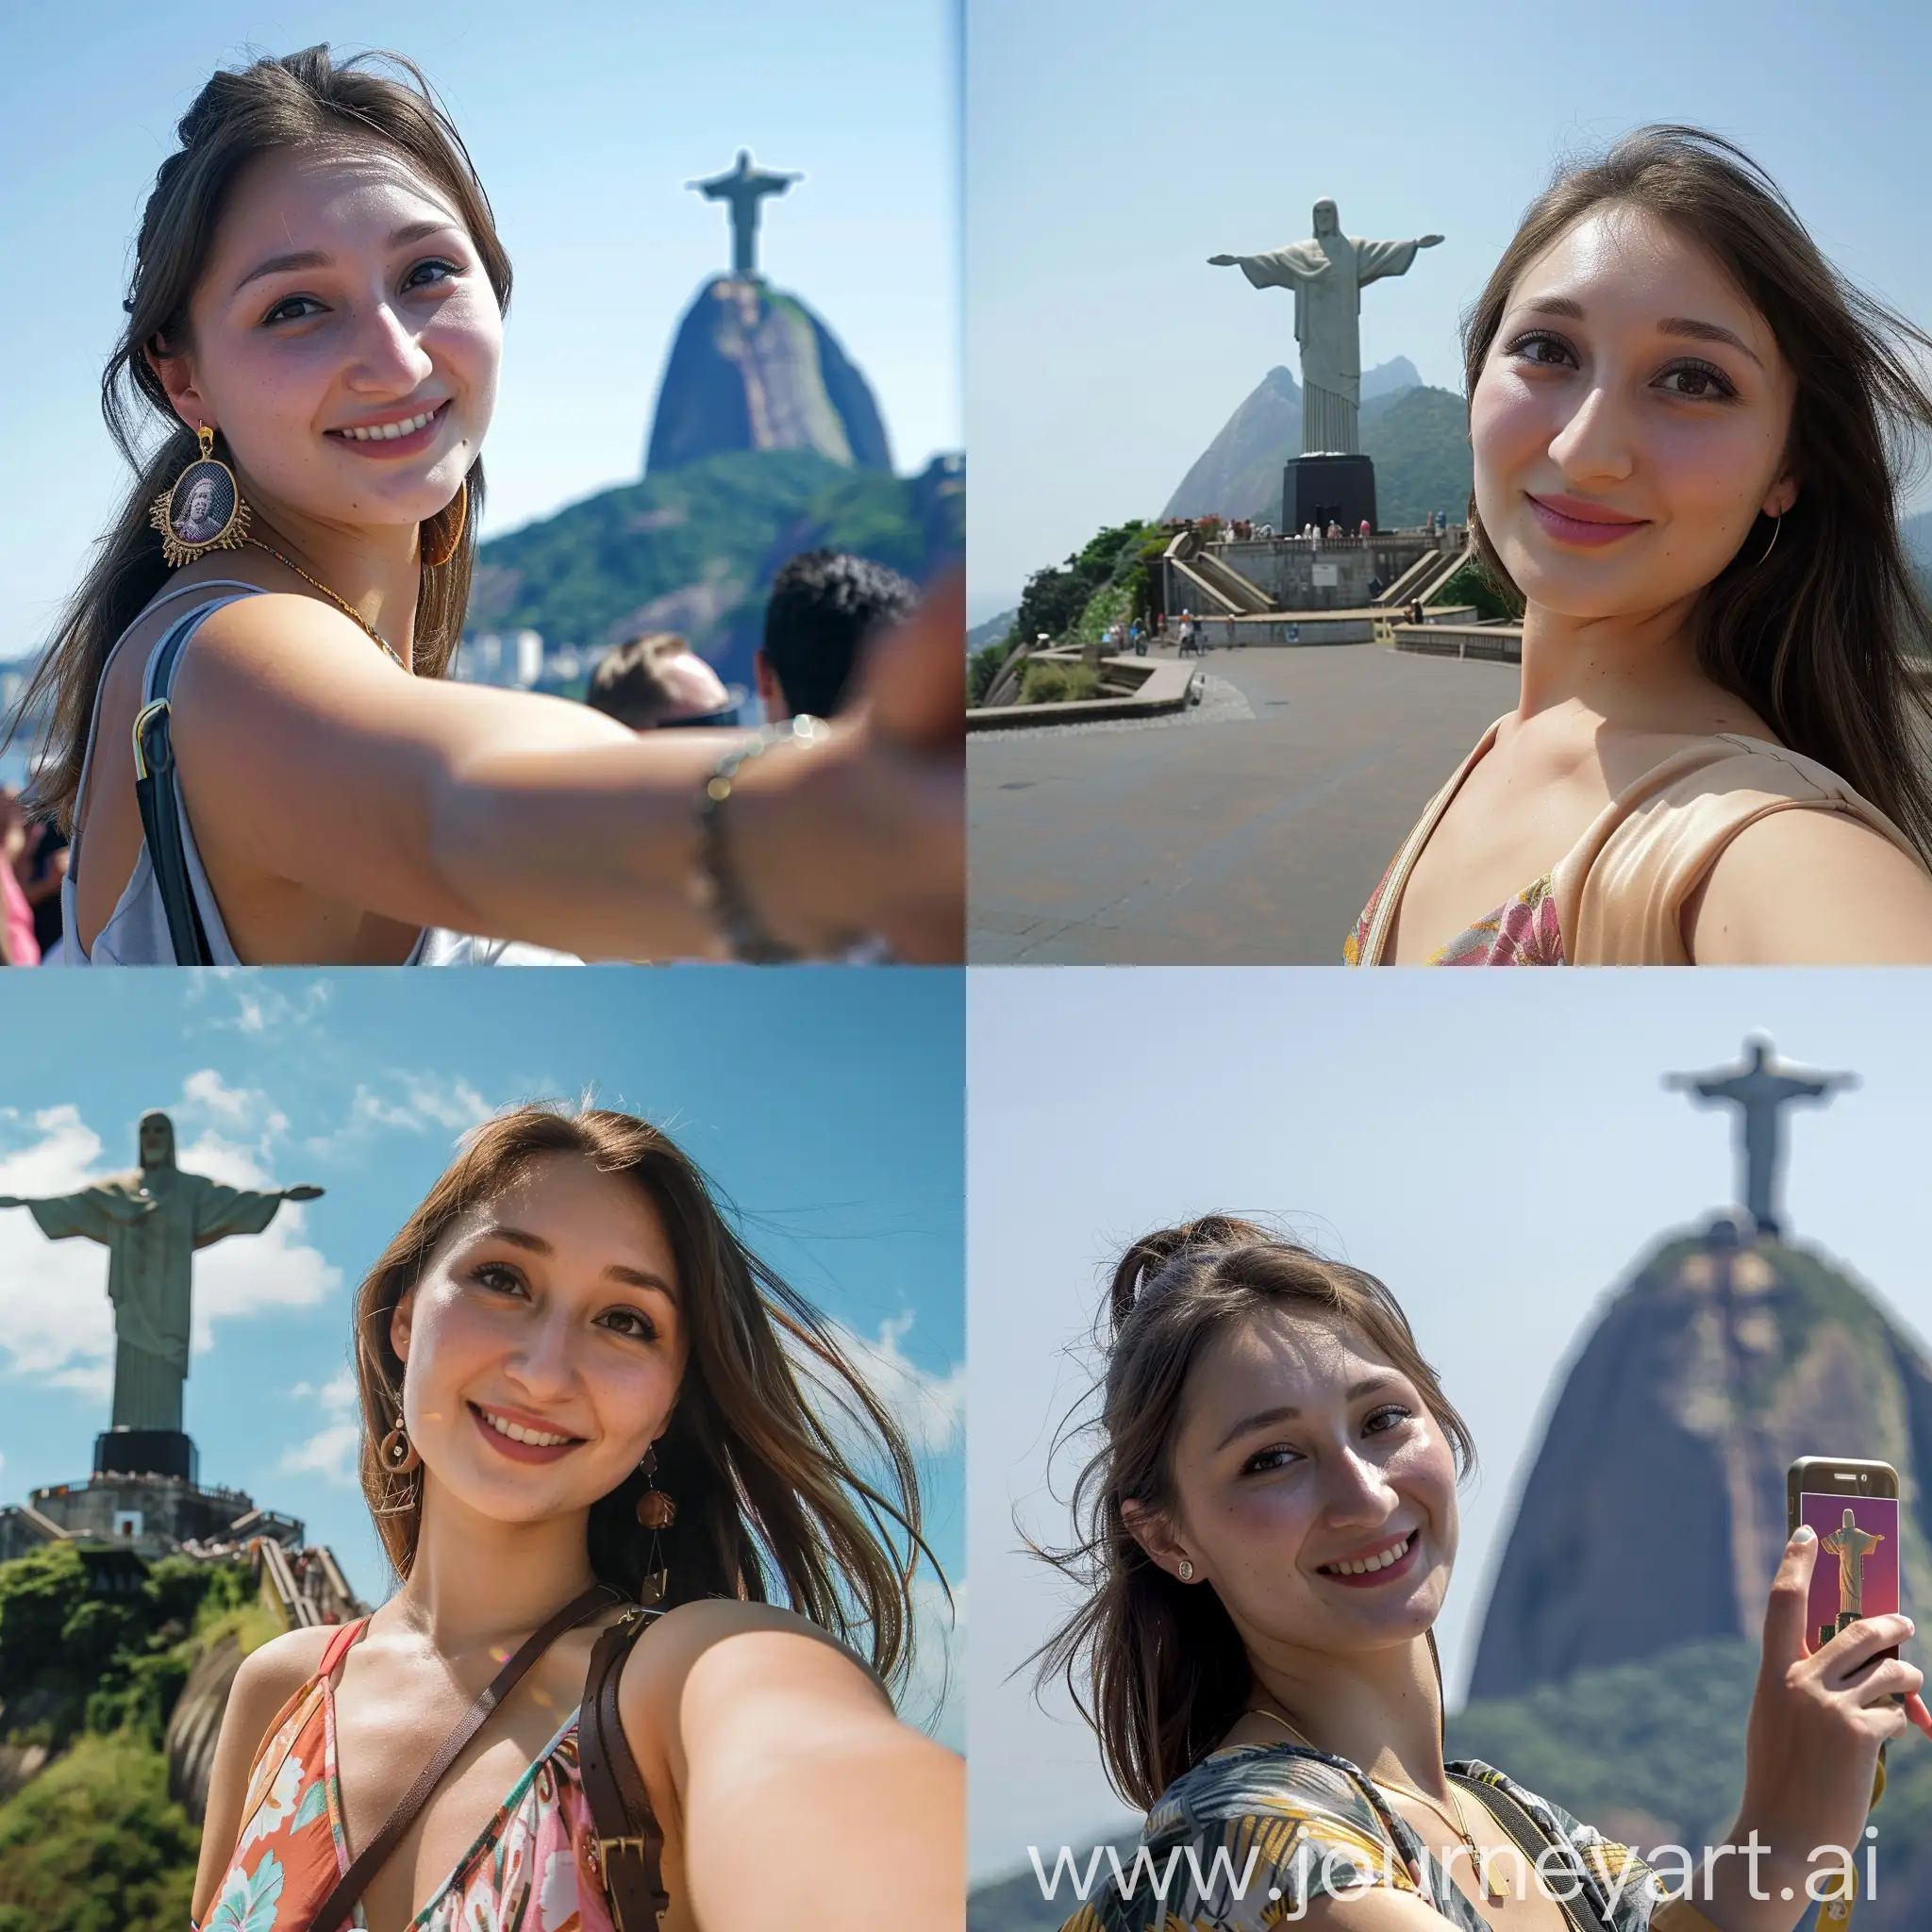 A 24 year old woman taking a selfie in Rio de Janeiro, Christ the Redeemer in the background --cref https://i.pinimg.com/280x280_RS/ae/81/9b/ae819bab94b187605f768cfdd8ff3a47.jpg --cw 0